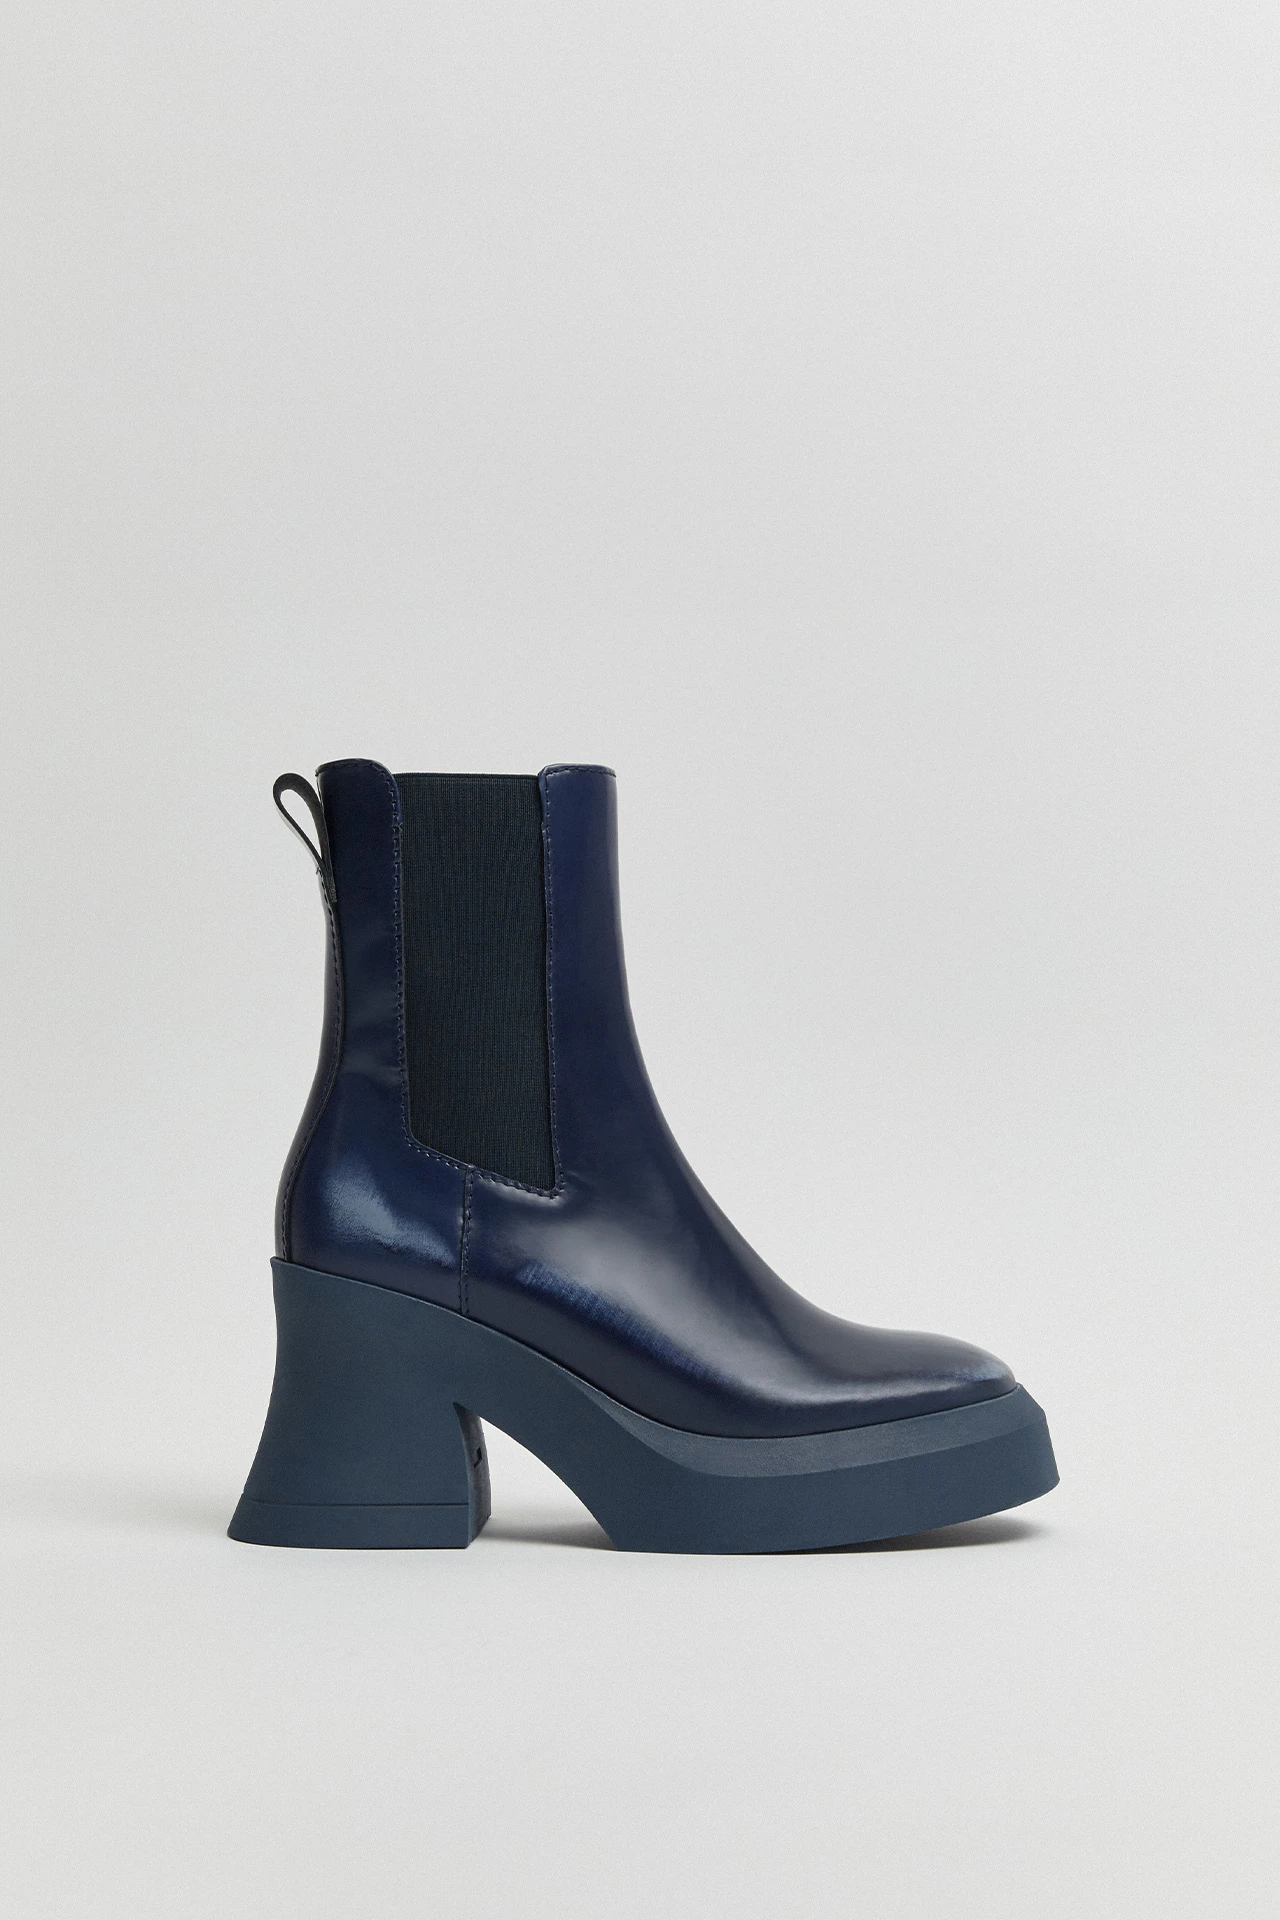 E8-analu-navy-ankle-boots-01